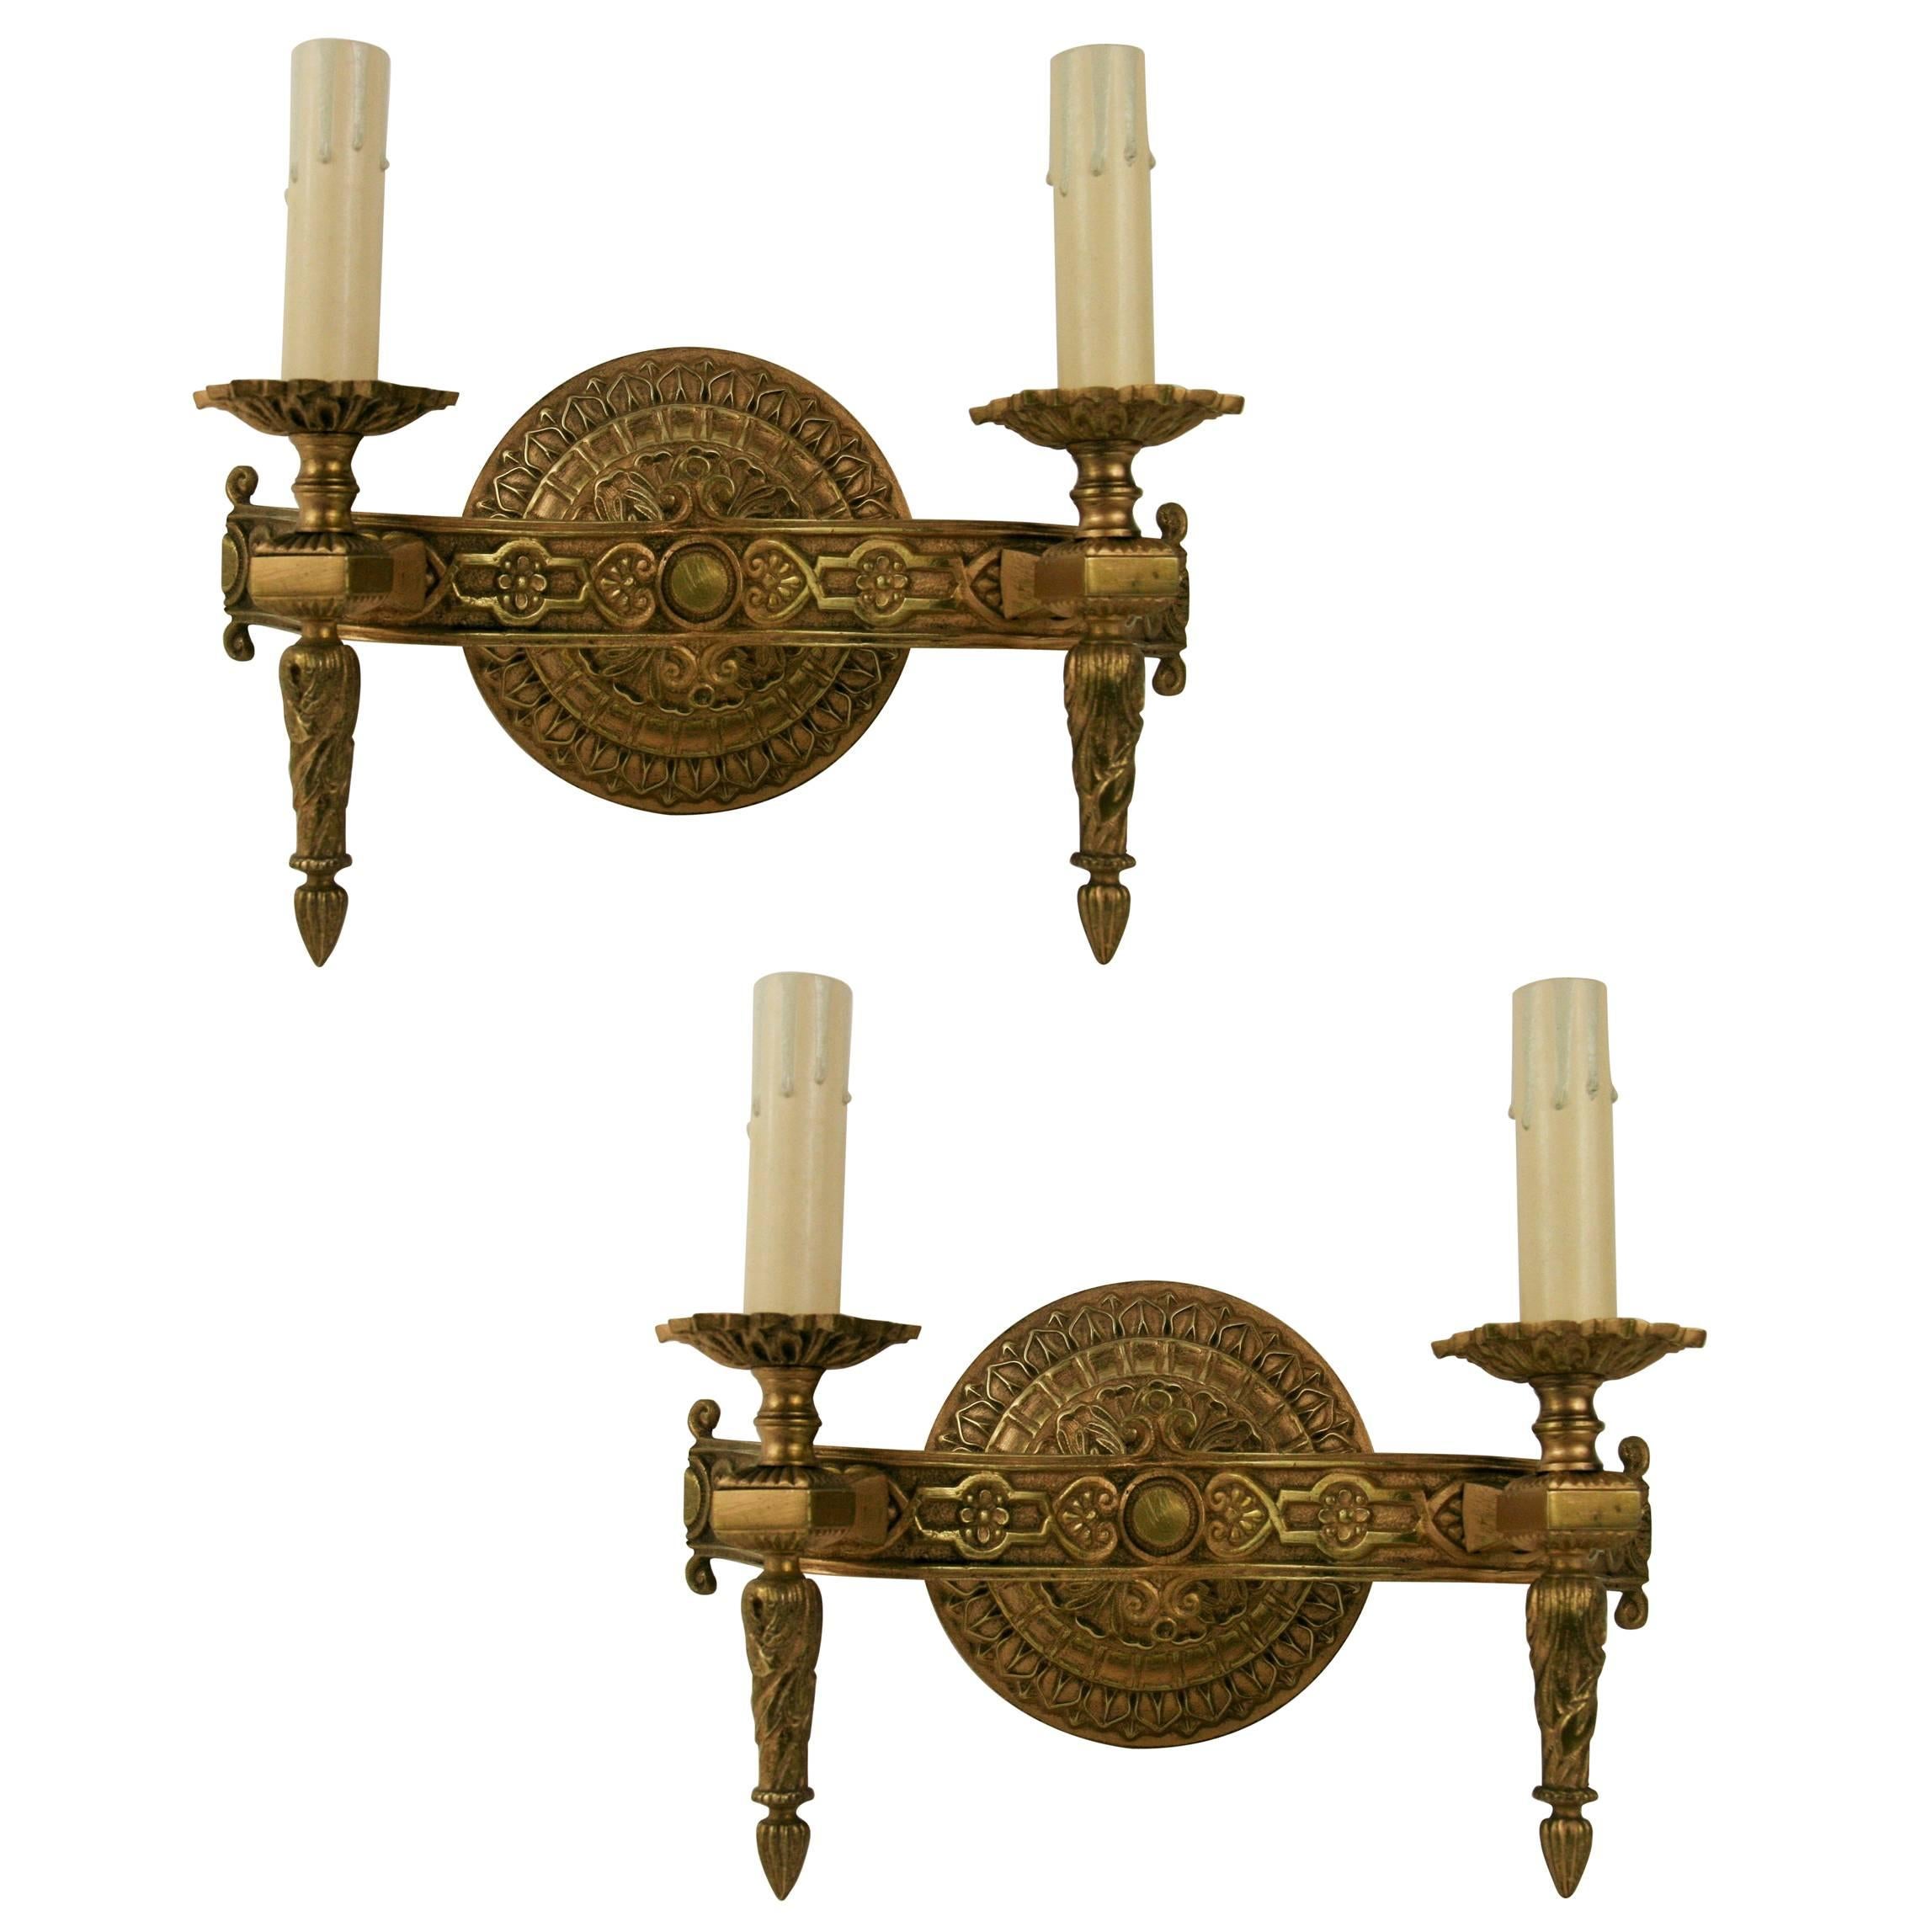 Pair of Italian Bronze Sconces(2 pair available)